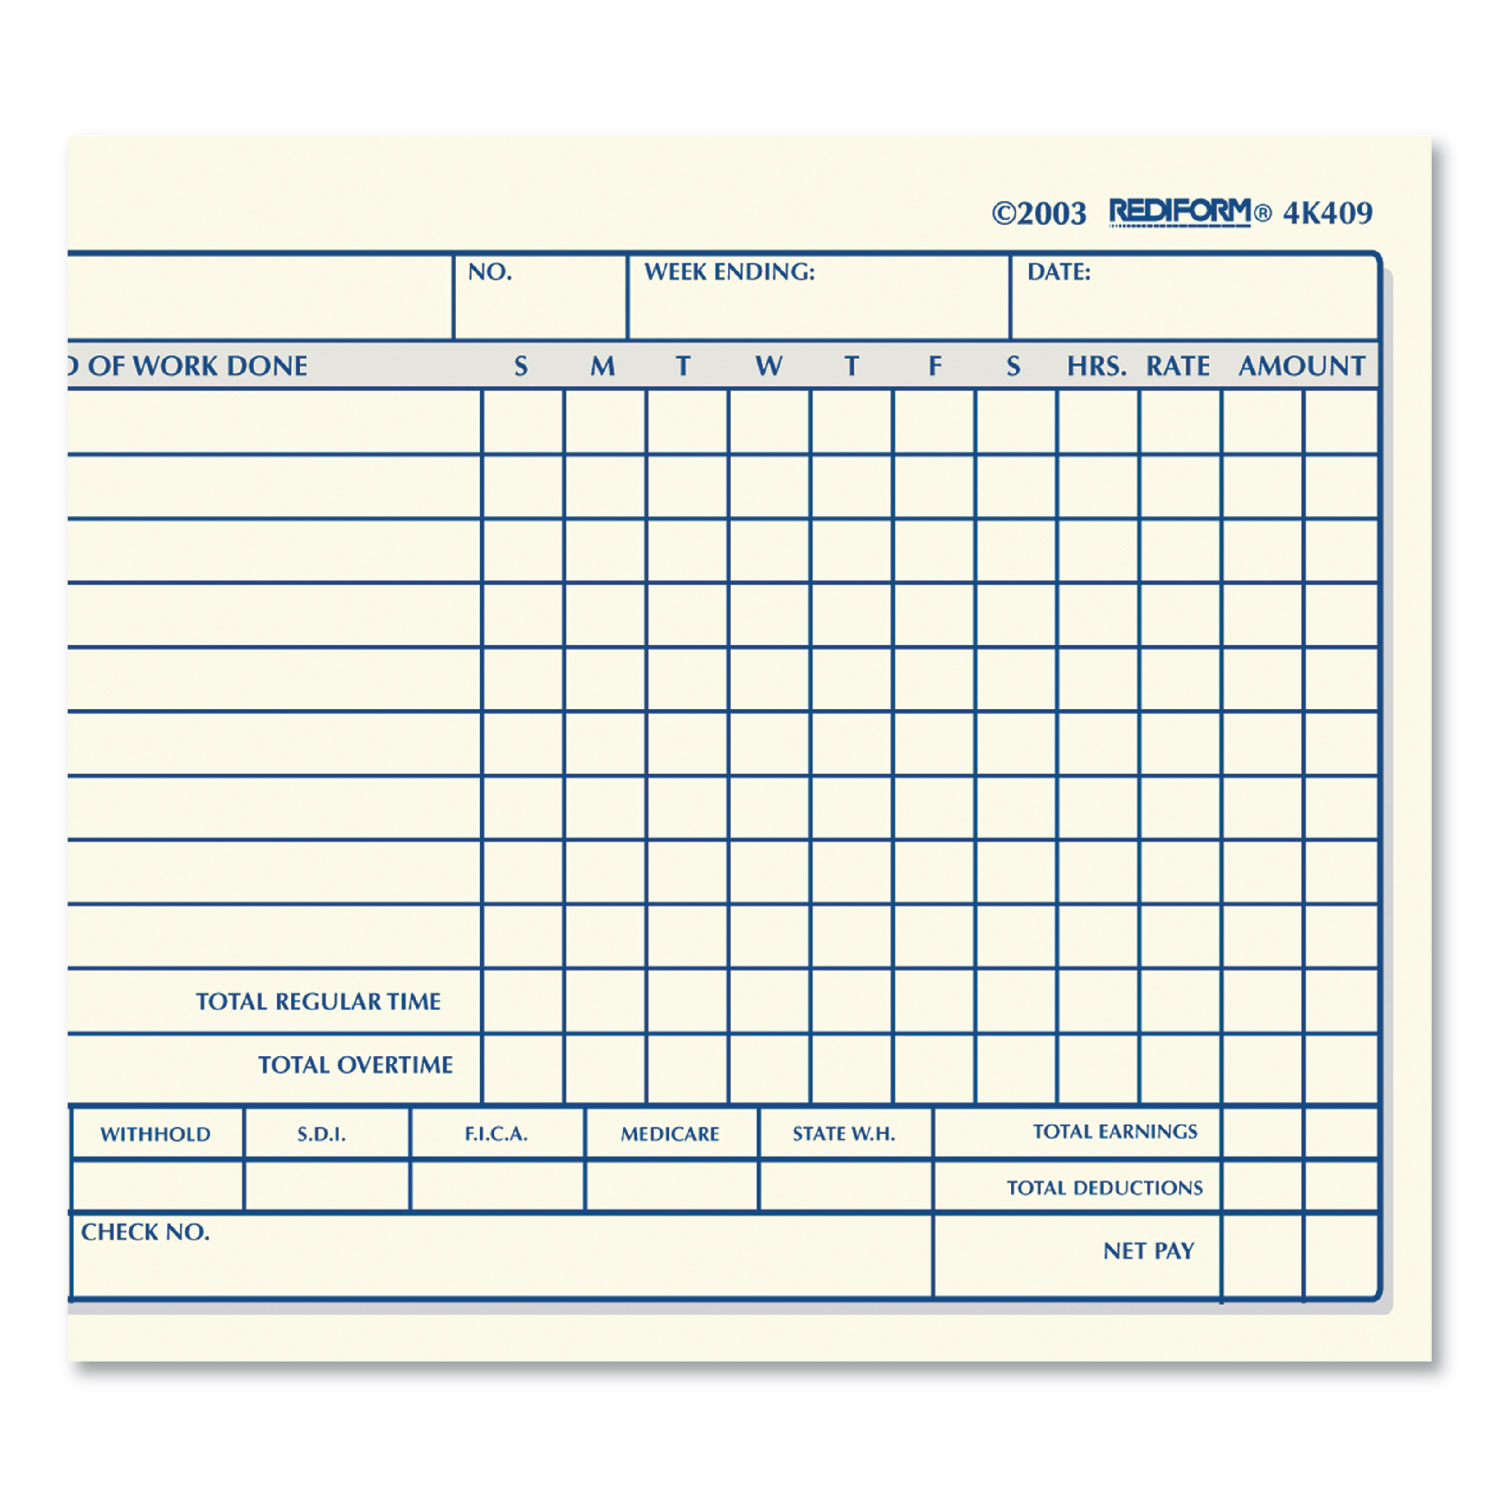 Pack Weekly Rediform Employee Time Card 4K409 2- 4.25 x 7 Inches 100 per Pad 